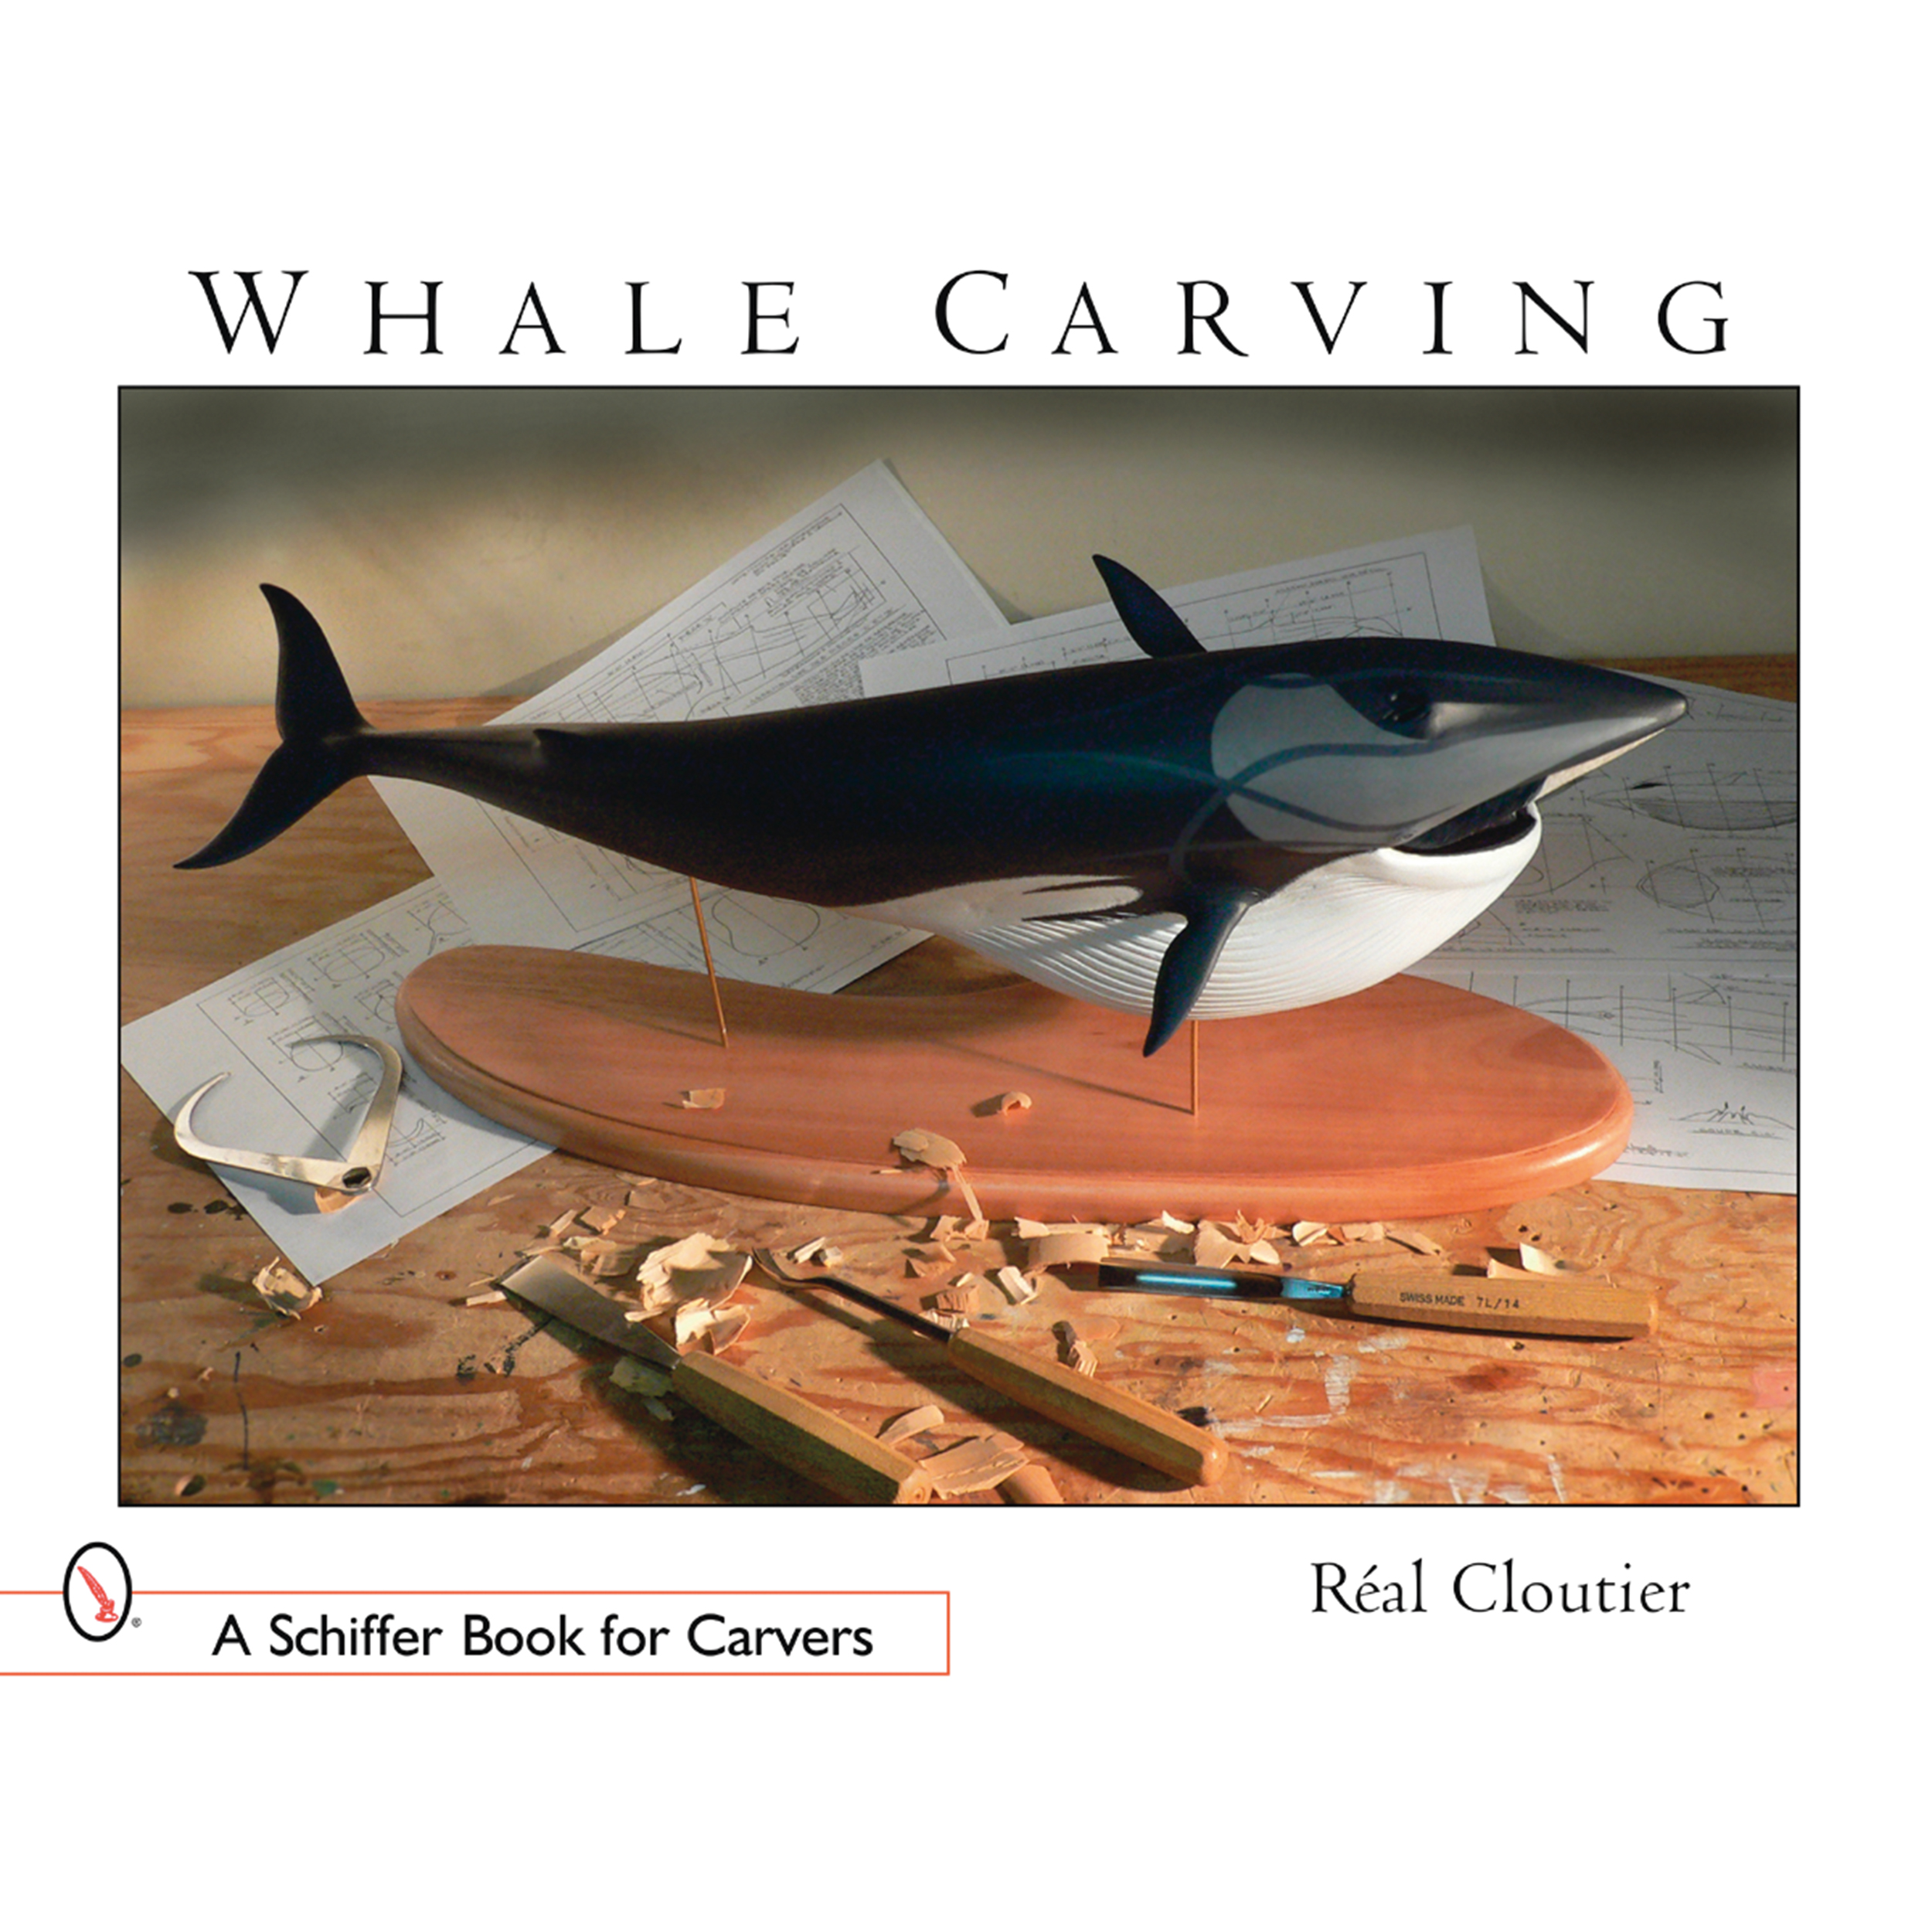 Whale Carving